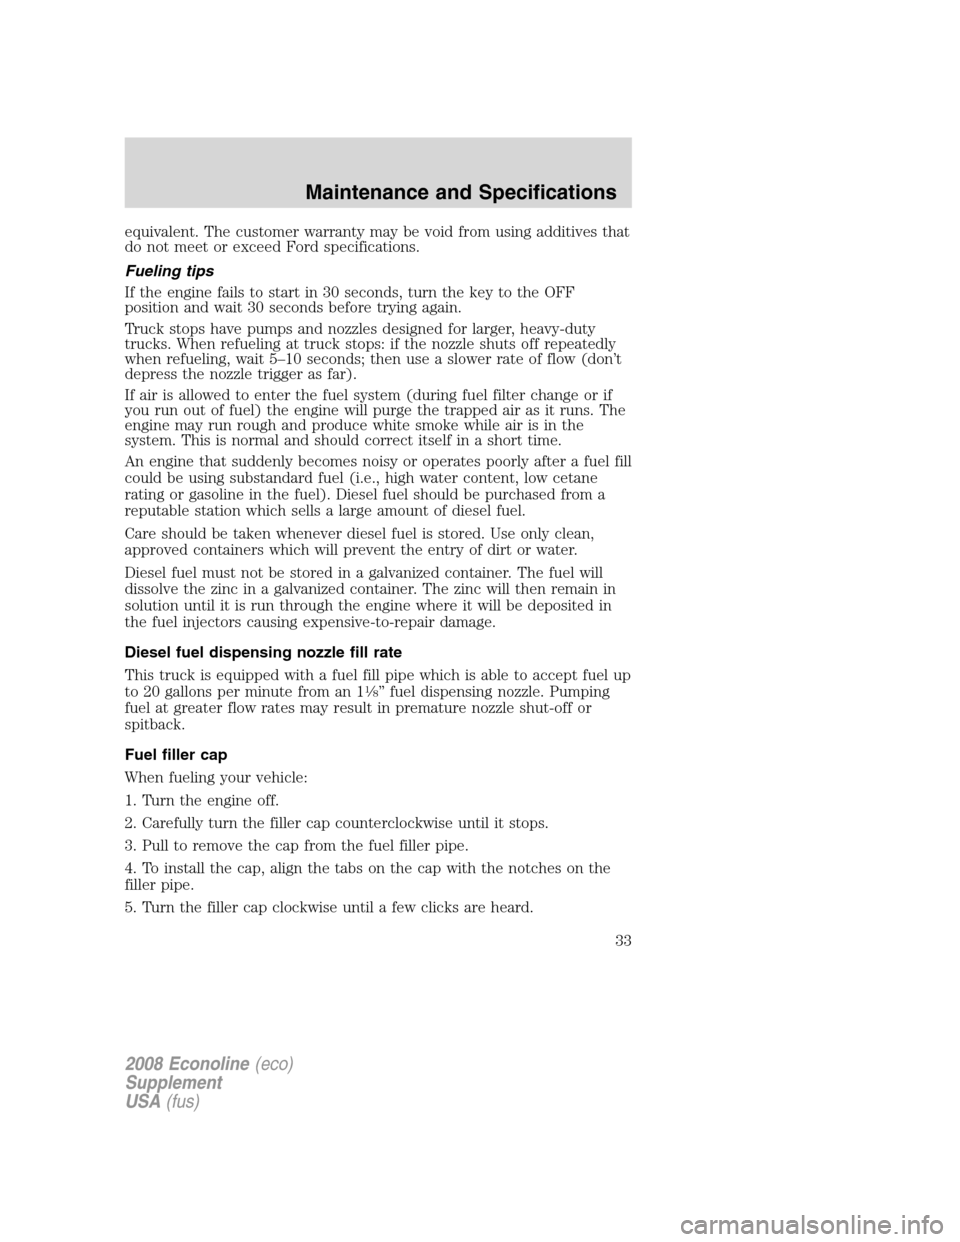 FORD SUPER DUTY 2008 2.G Diesel Supplement Manual equivalent. The customer warranty may be void from using additives that
do not meet or exceed Ford specifications.
Fueling tips
If the engine fails to start in 30 seconds, turn the key to the OFF
posi